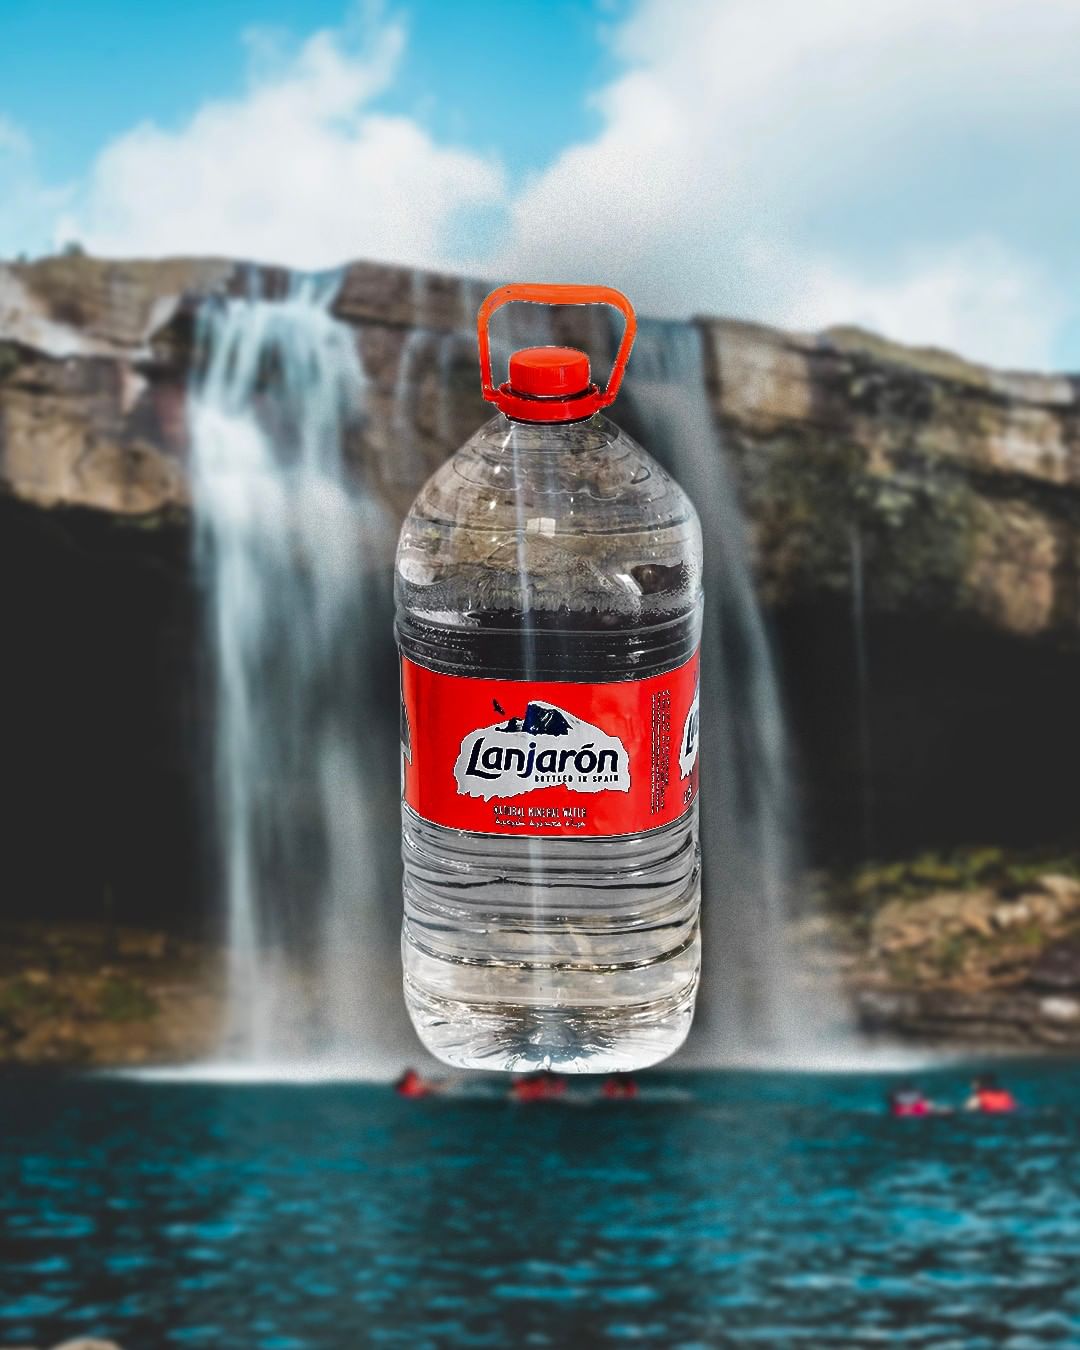 🏊‍♂️Whats better than swimming in #natural mineral water? ⁠ ⁠ 💧Drinking Pure Natural Mineral #Water. #Lanjaron water contains pure natural minerals, bottled at source.